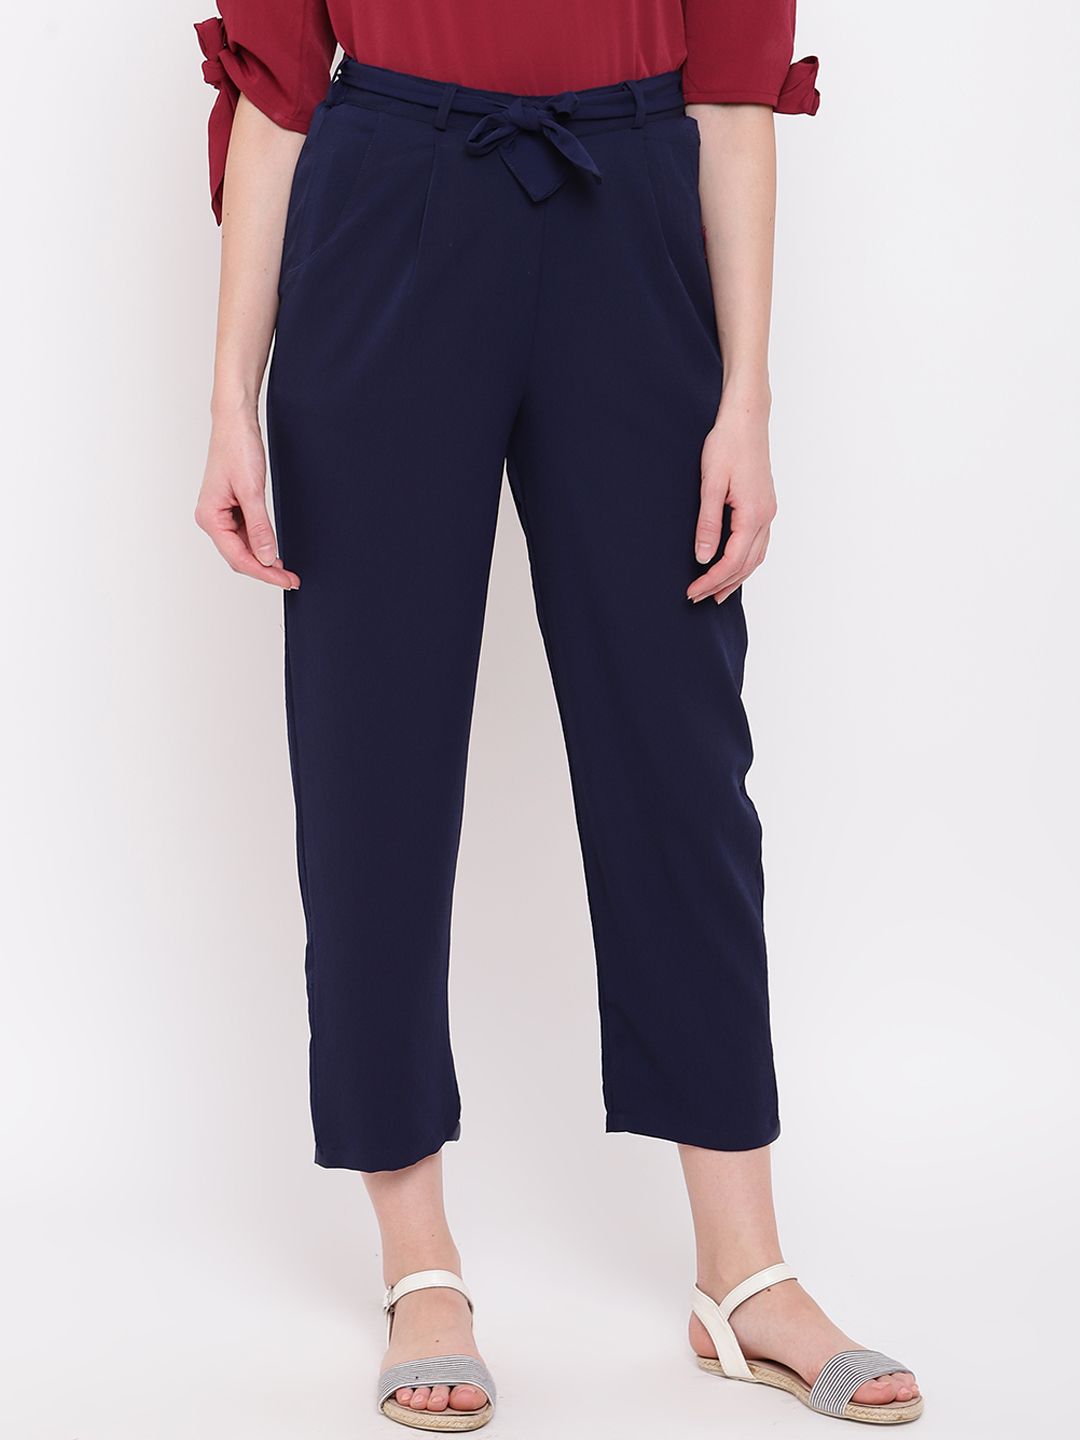 Mayra Women Navy Blue Regular Fit Solid Peg Trousers Price in India